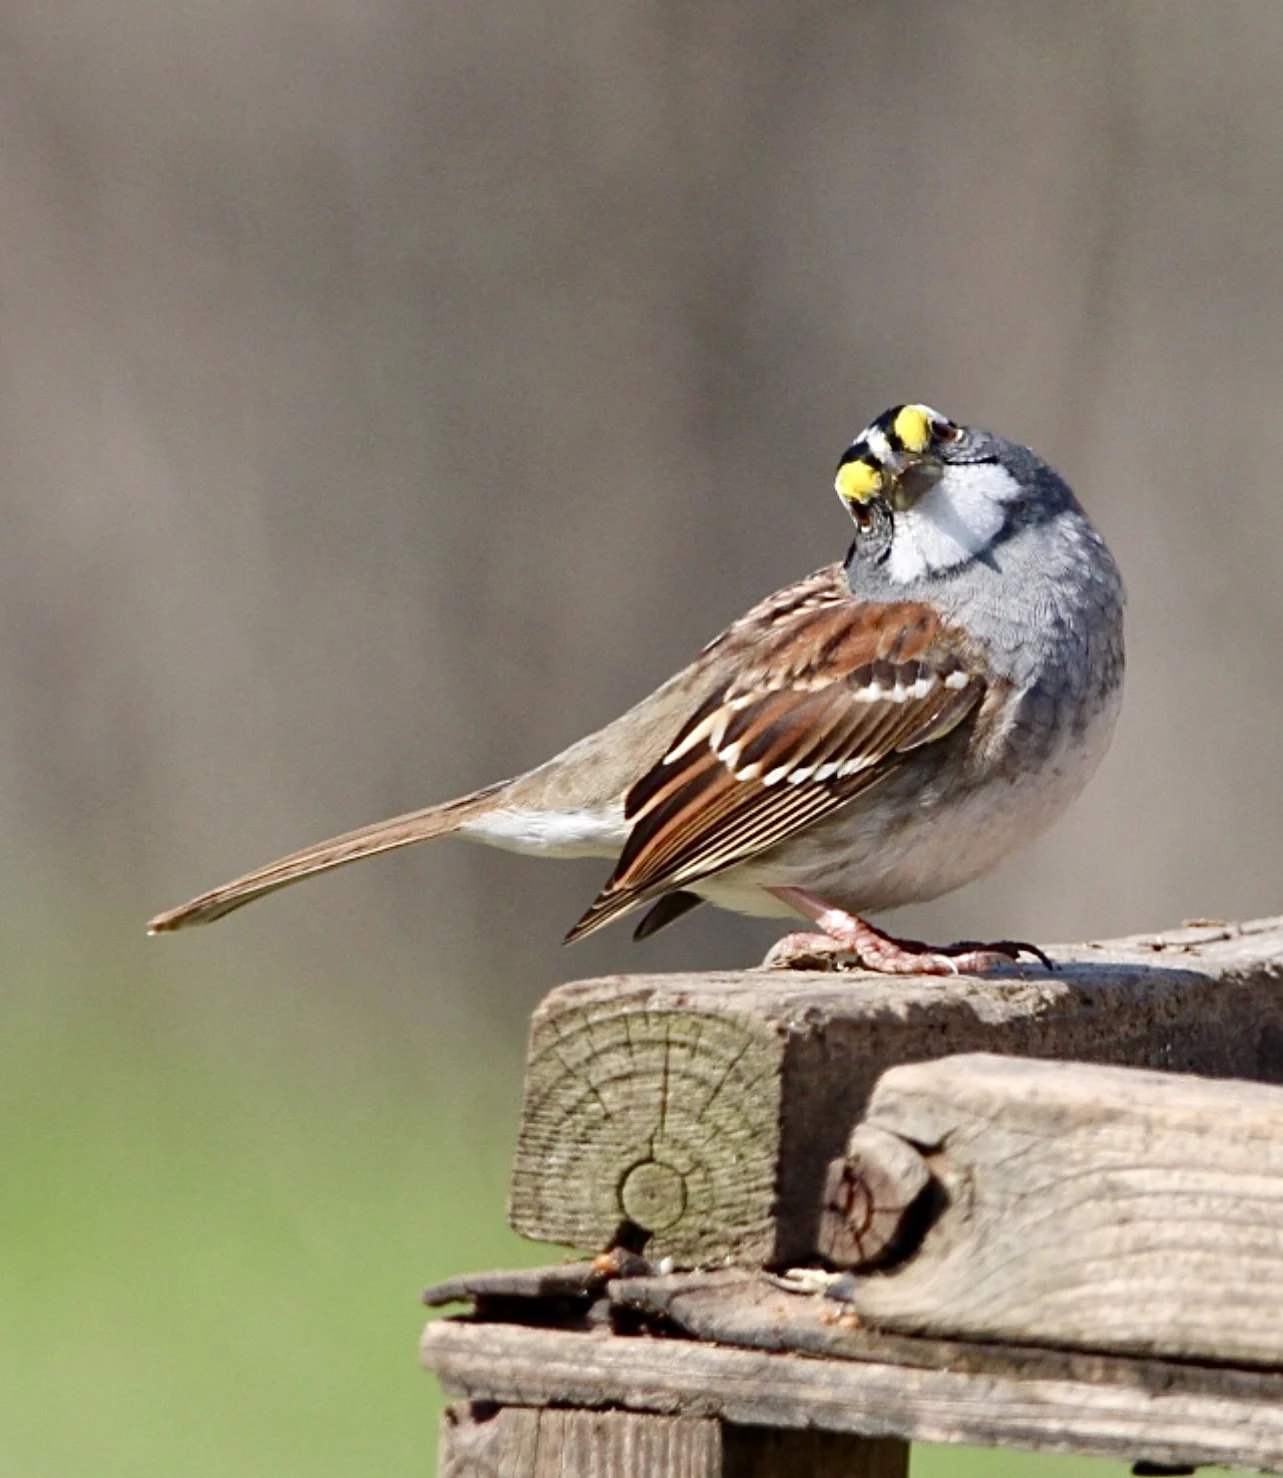 White-throated sparrow posing glamorously (Cindy Broderick/UGC)